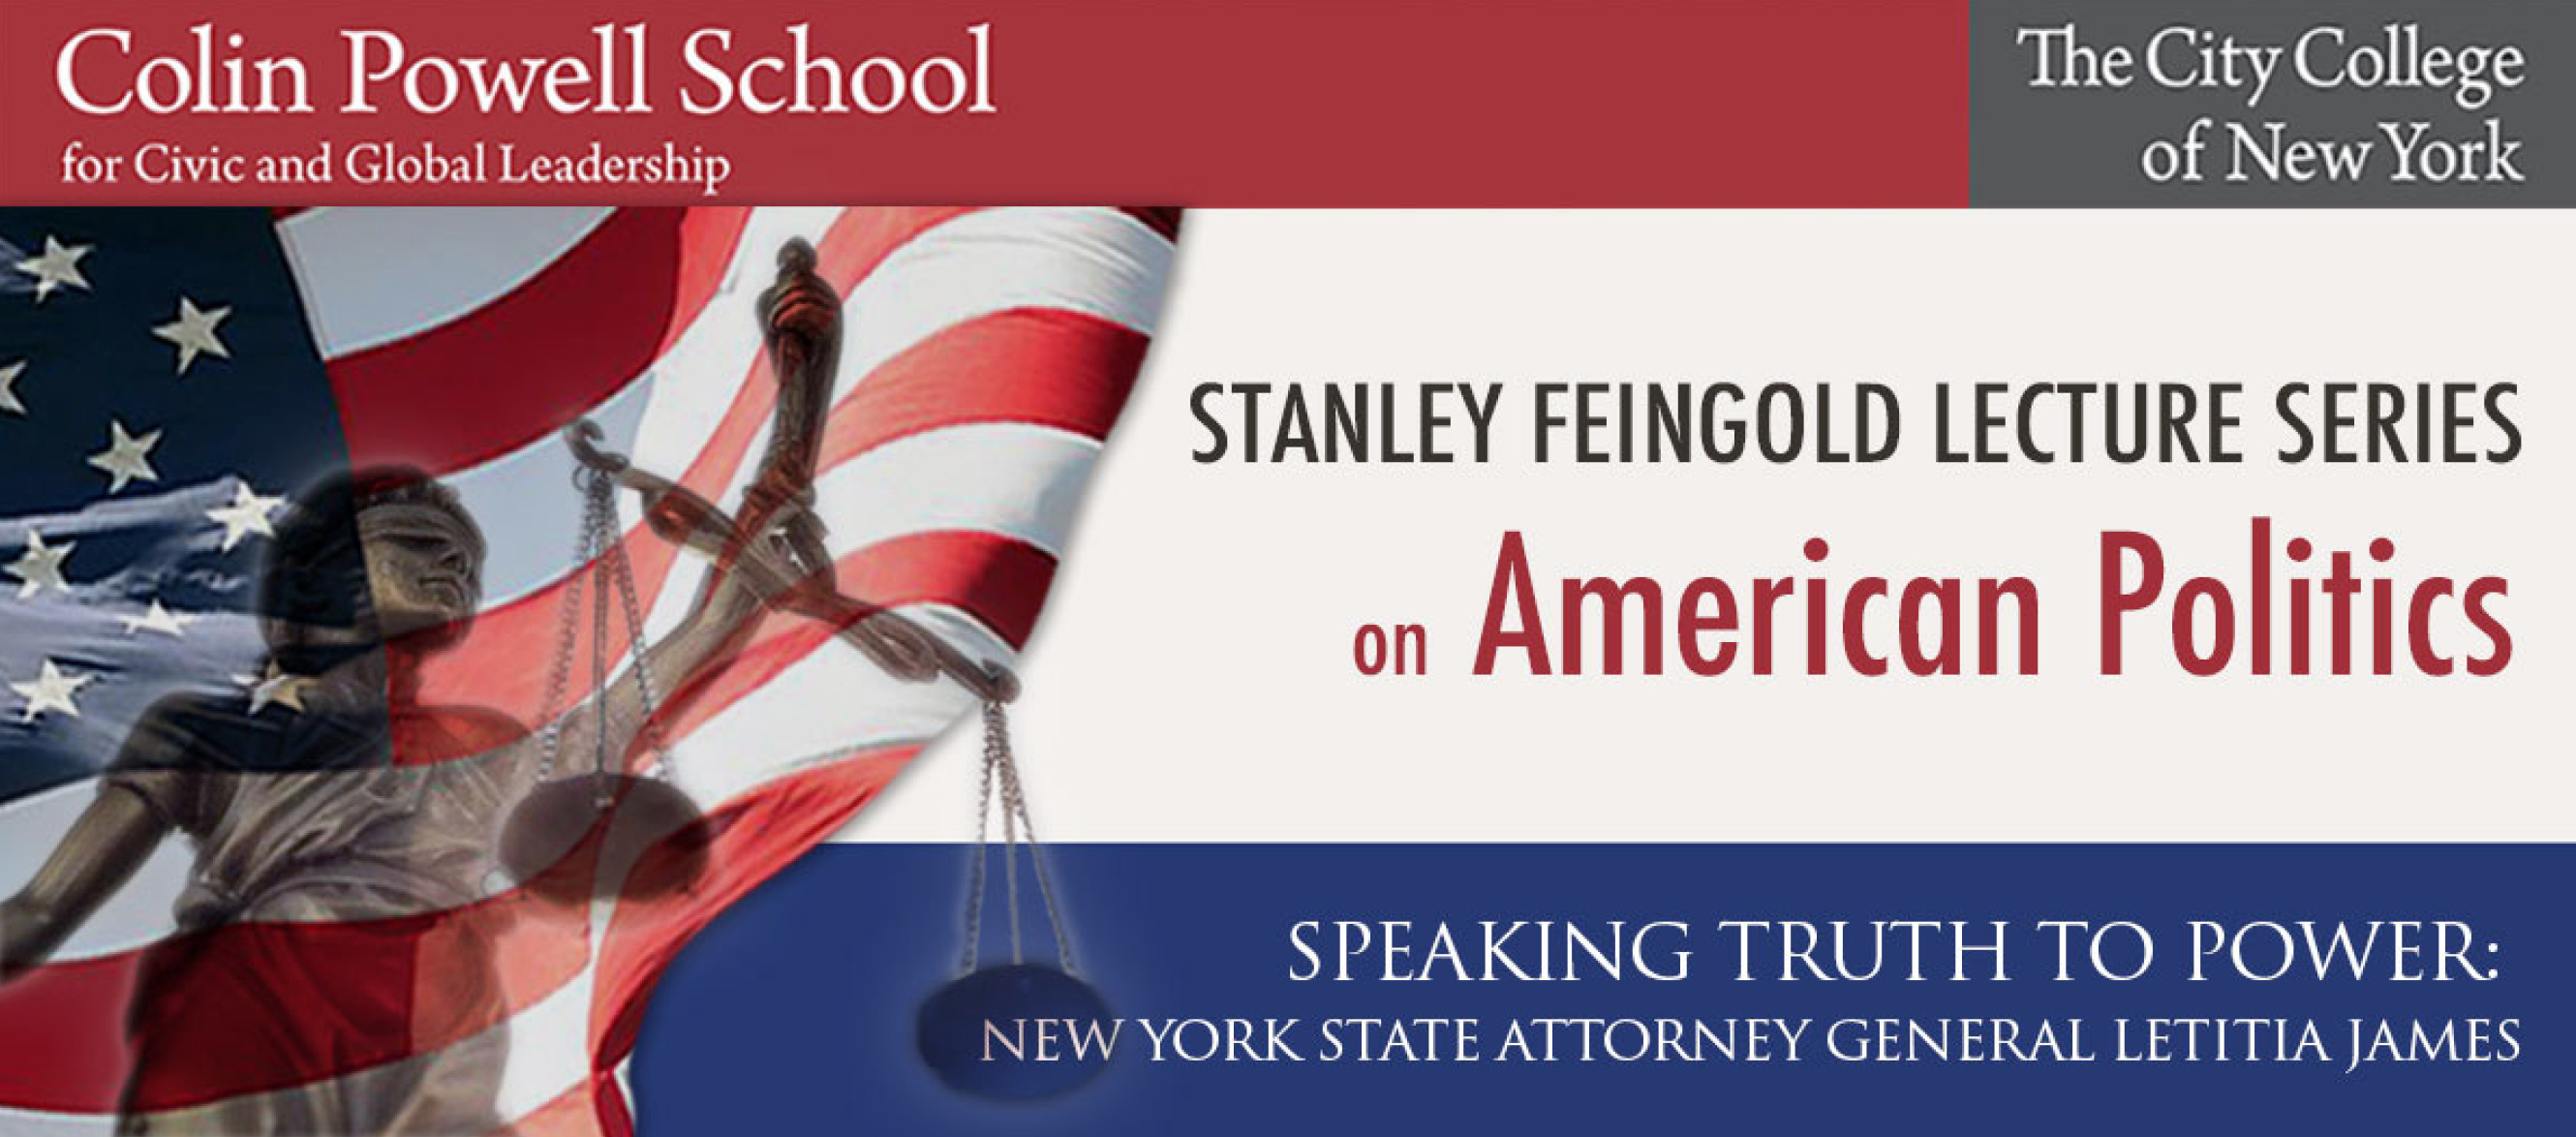 2021 Stanley Feingold Lecture on American Politics, featuring NY Attorney General Letitia James on November 23rd at 4:30pm.